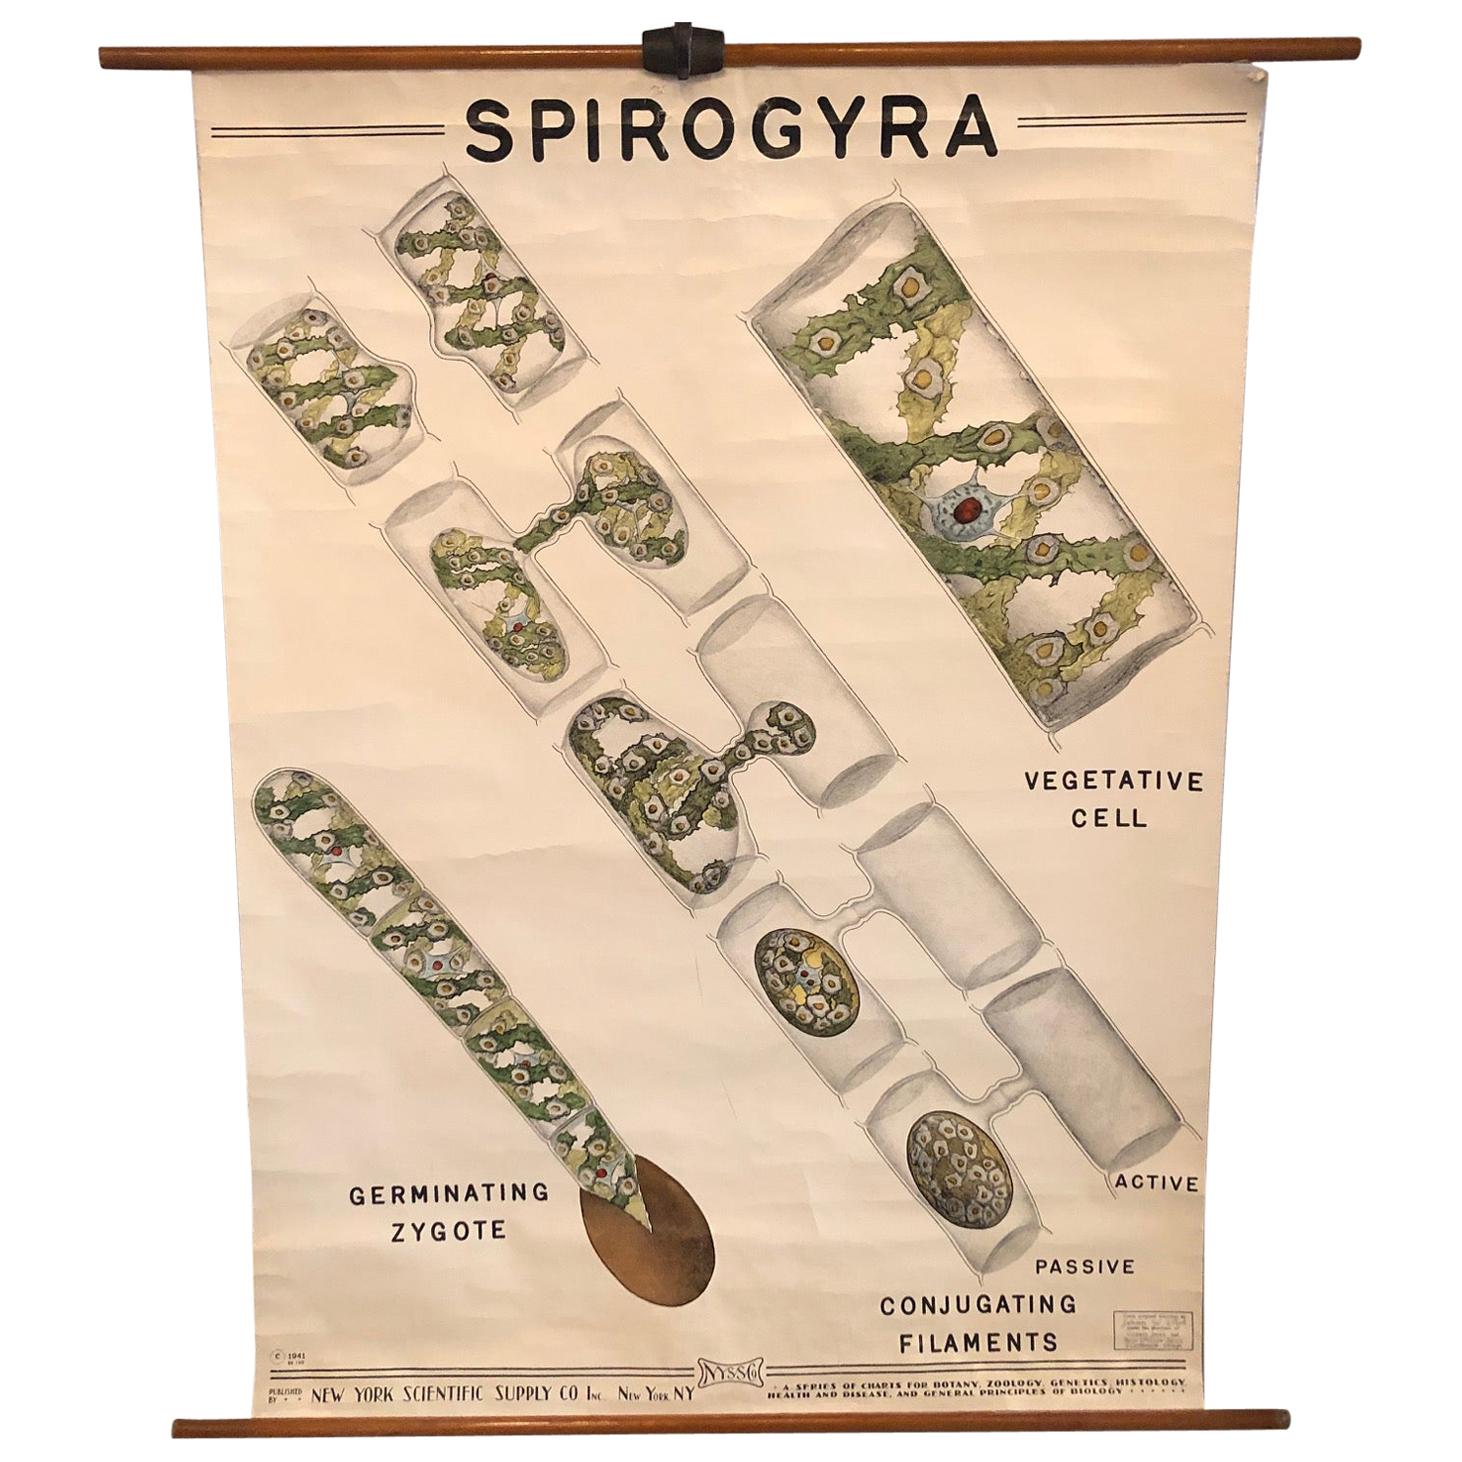 Educational Botanical Spirogyra Biology Chart by New York Scientific Supply Co. For Sale